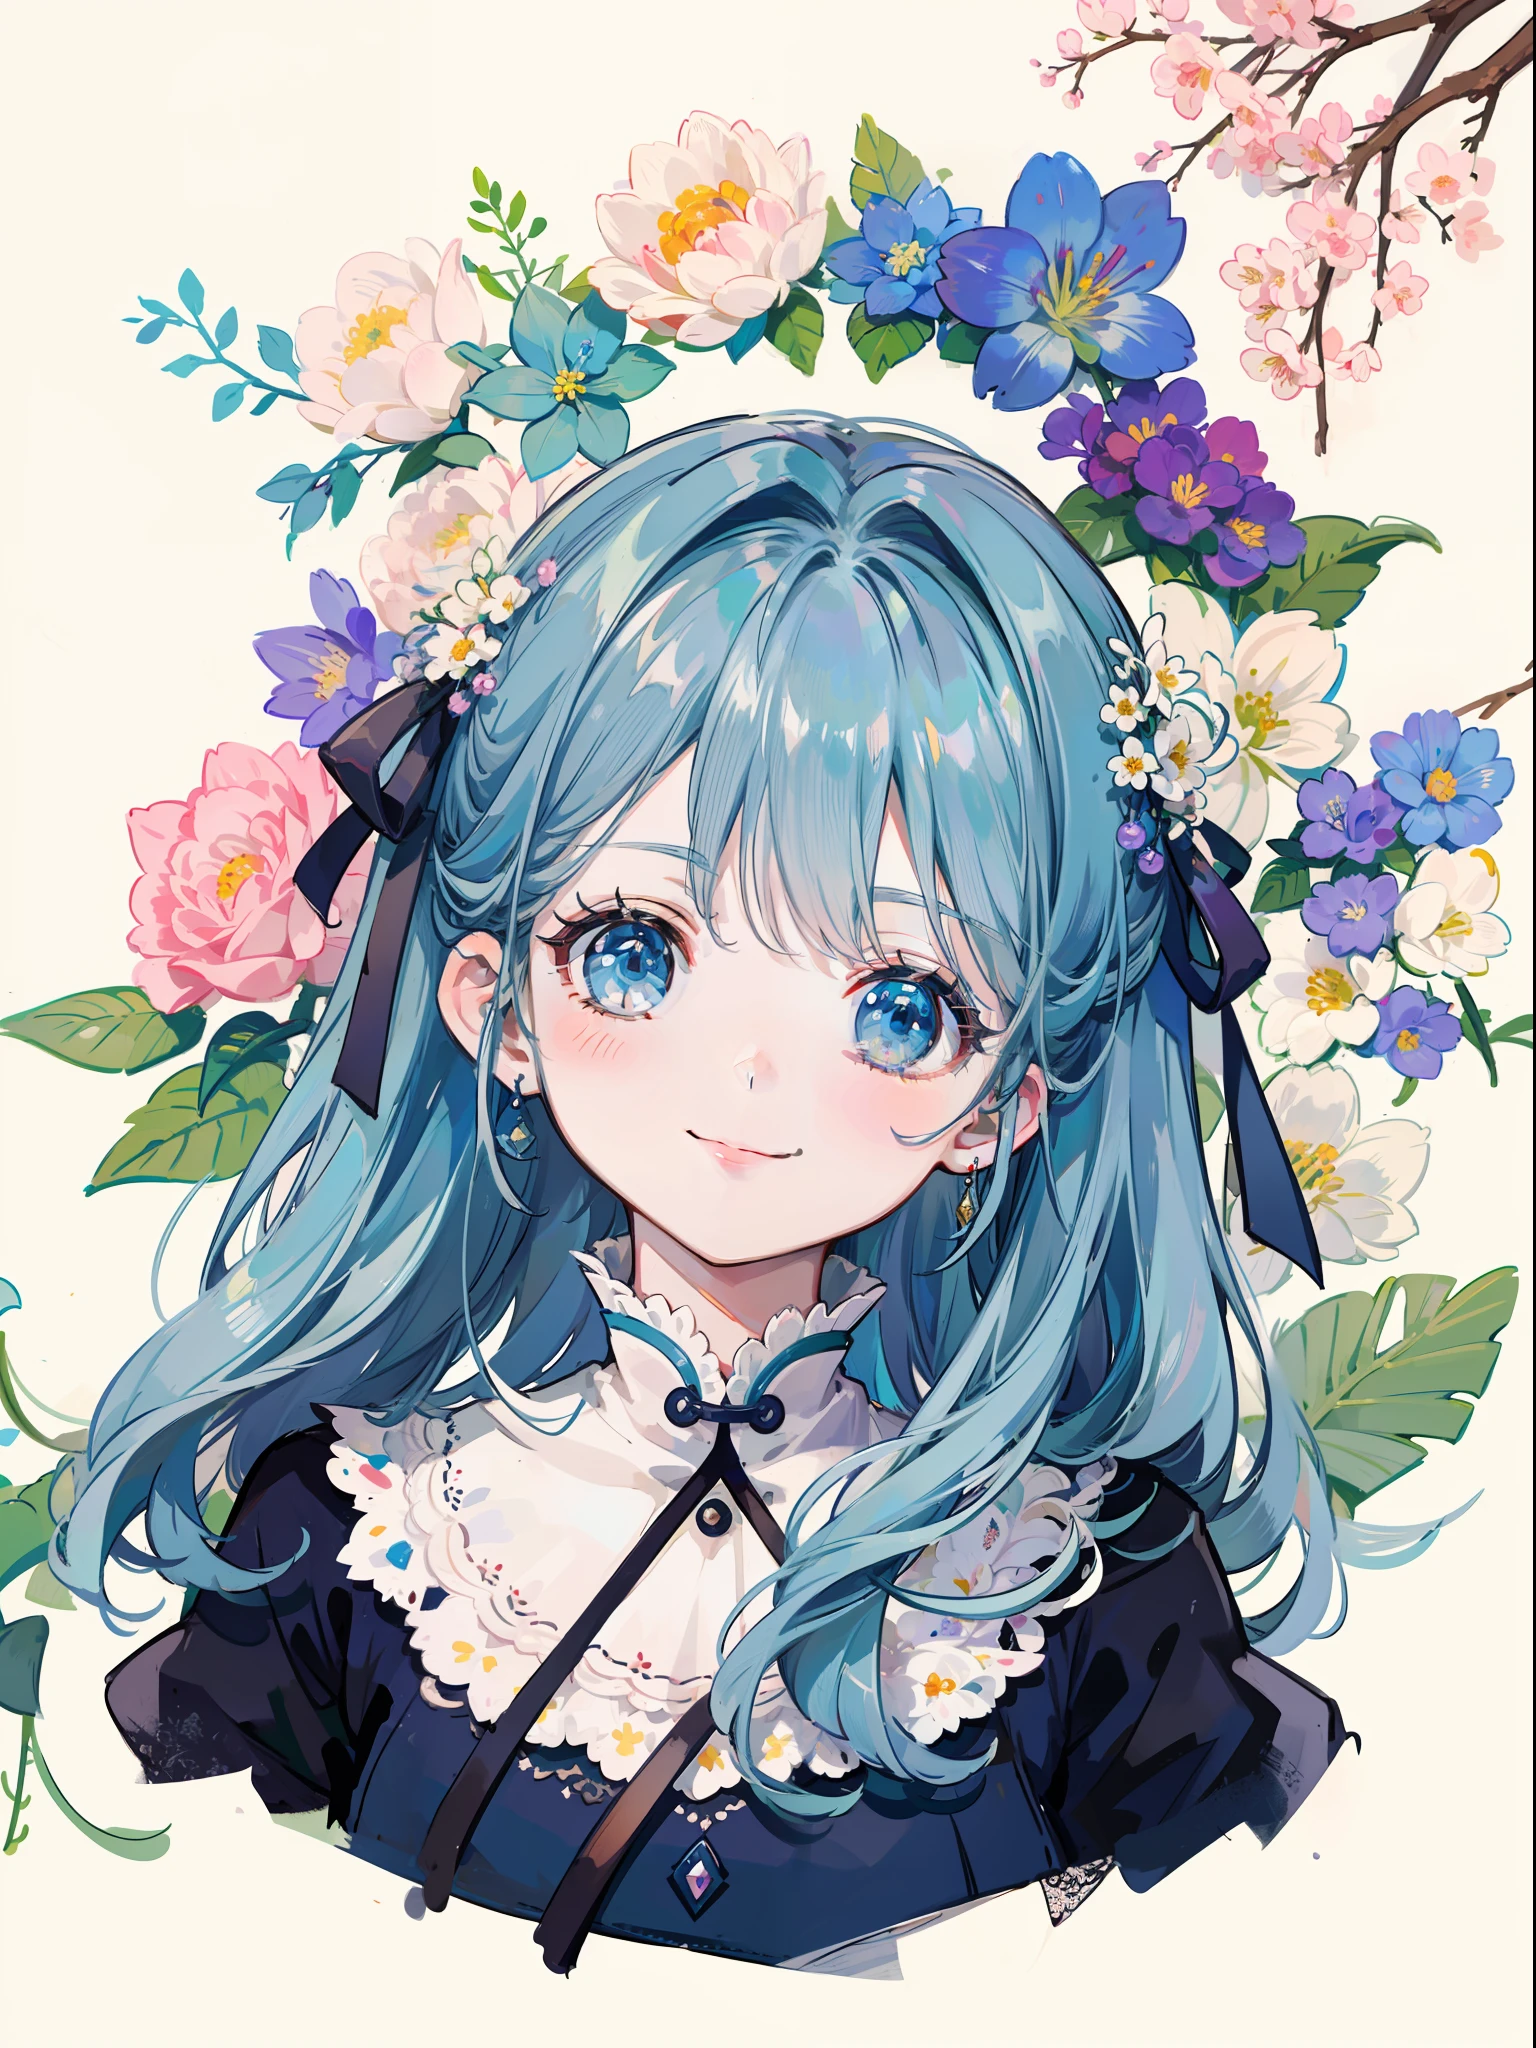 Background overflowing with many flowers、Close up portrait of a woman smiling with a big smile。There are also a lot of flowers in the hair。Cute illustrations full of happiness、Floral background、Extremely high quality、high-level image quality、Extremely delicate drawing。Rarely seen workmanship